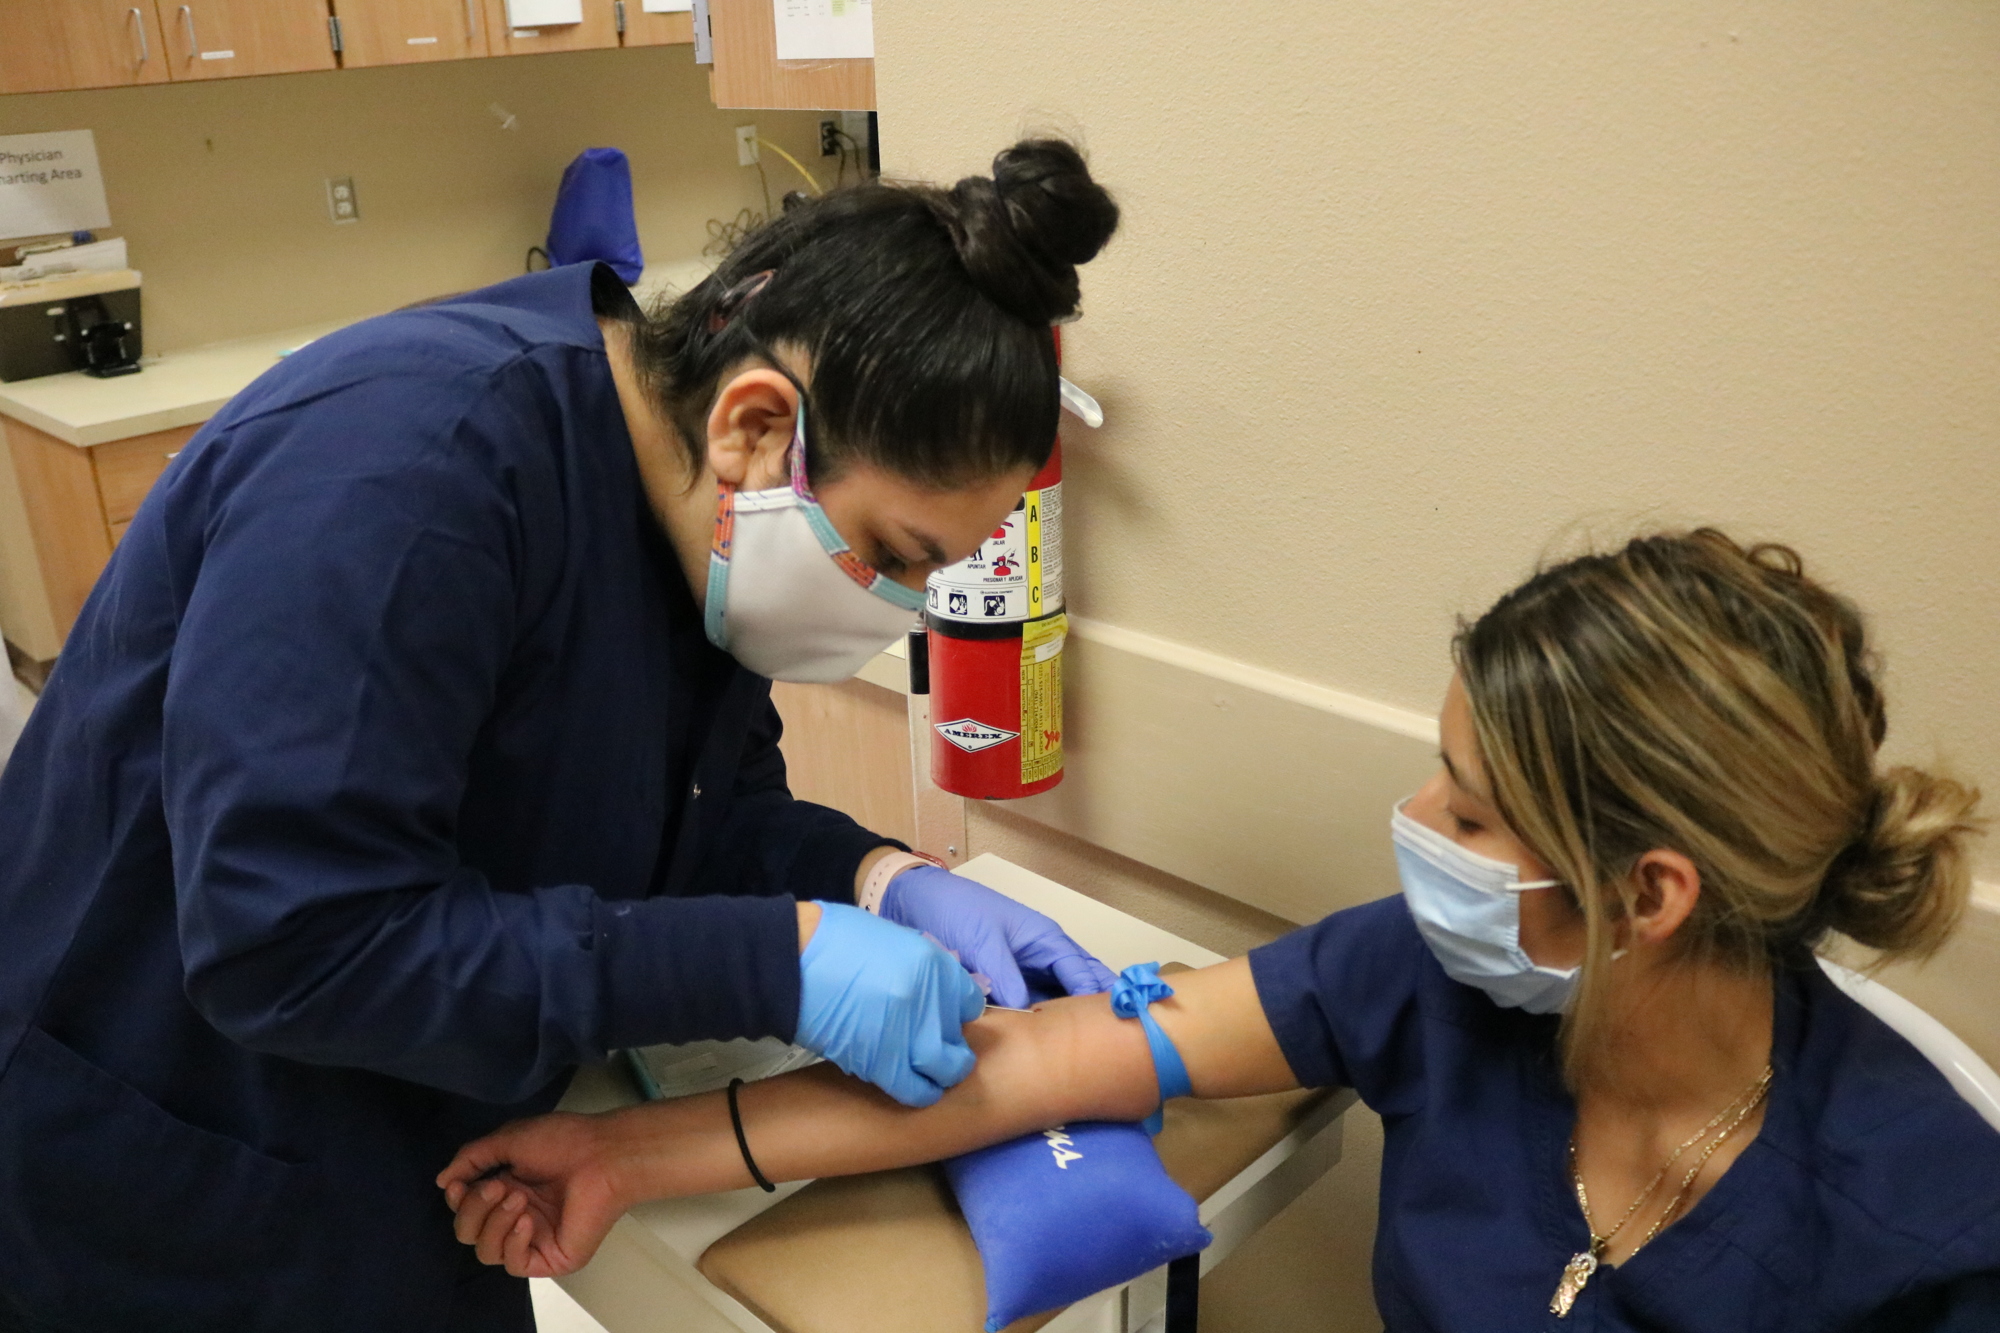 Jackie Pizano, a Phlebotomy student, learns how to draw blood from her classmate, Anahi Vasquez. Courtesy photo.